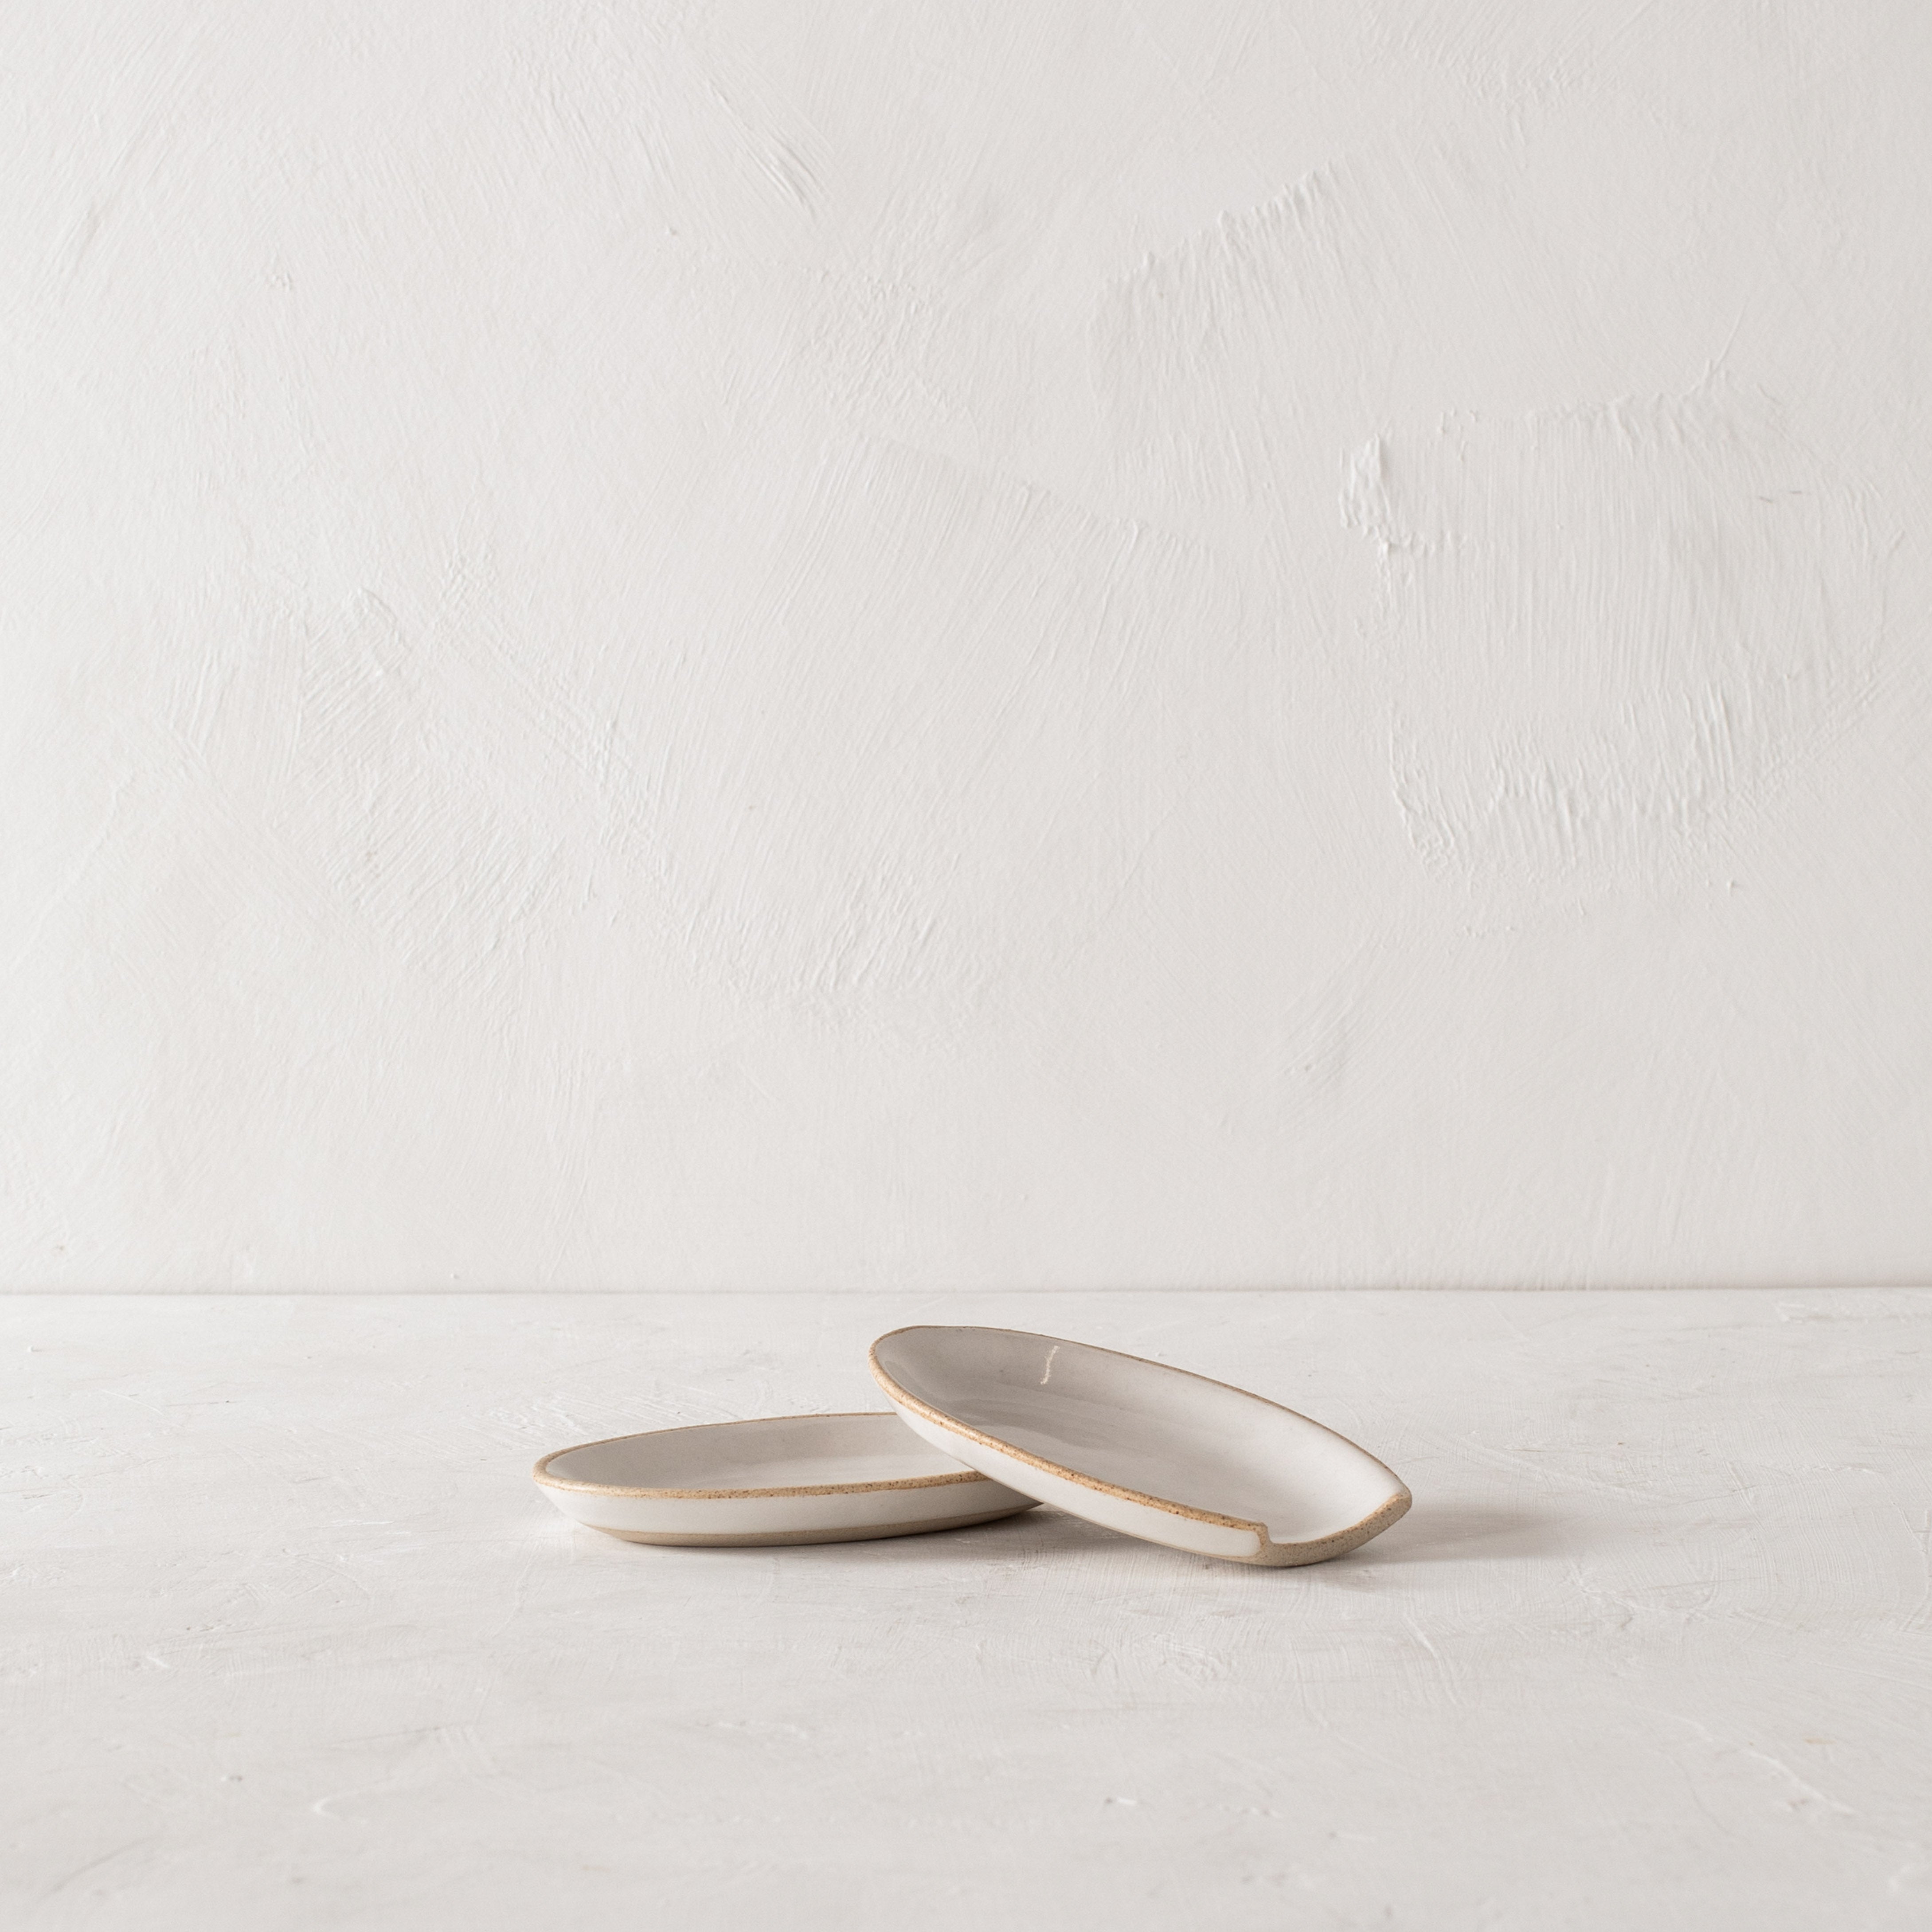 White ceramic spoon rests stacked on top of each other. Spoon rest is in an oval shape with an exposed stoneware rim. Hand made ceramic spoon rest sold and designed by Convivial Production, Kansas City ceramics.